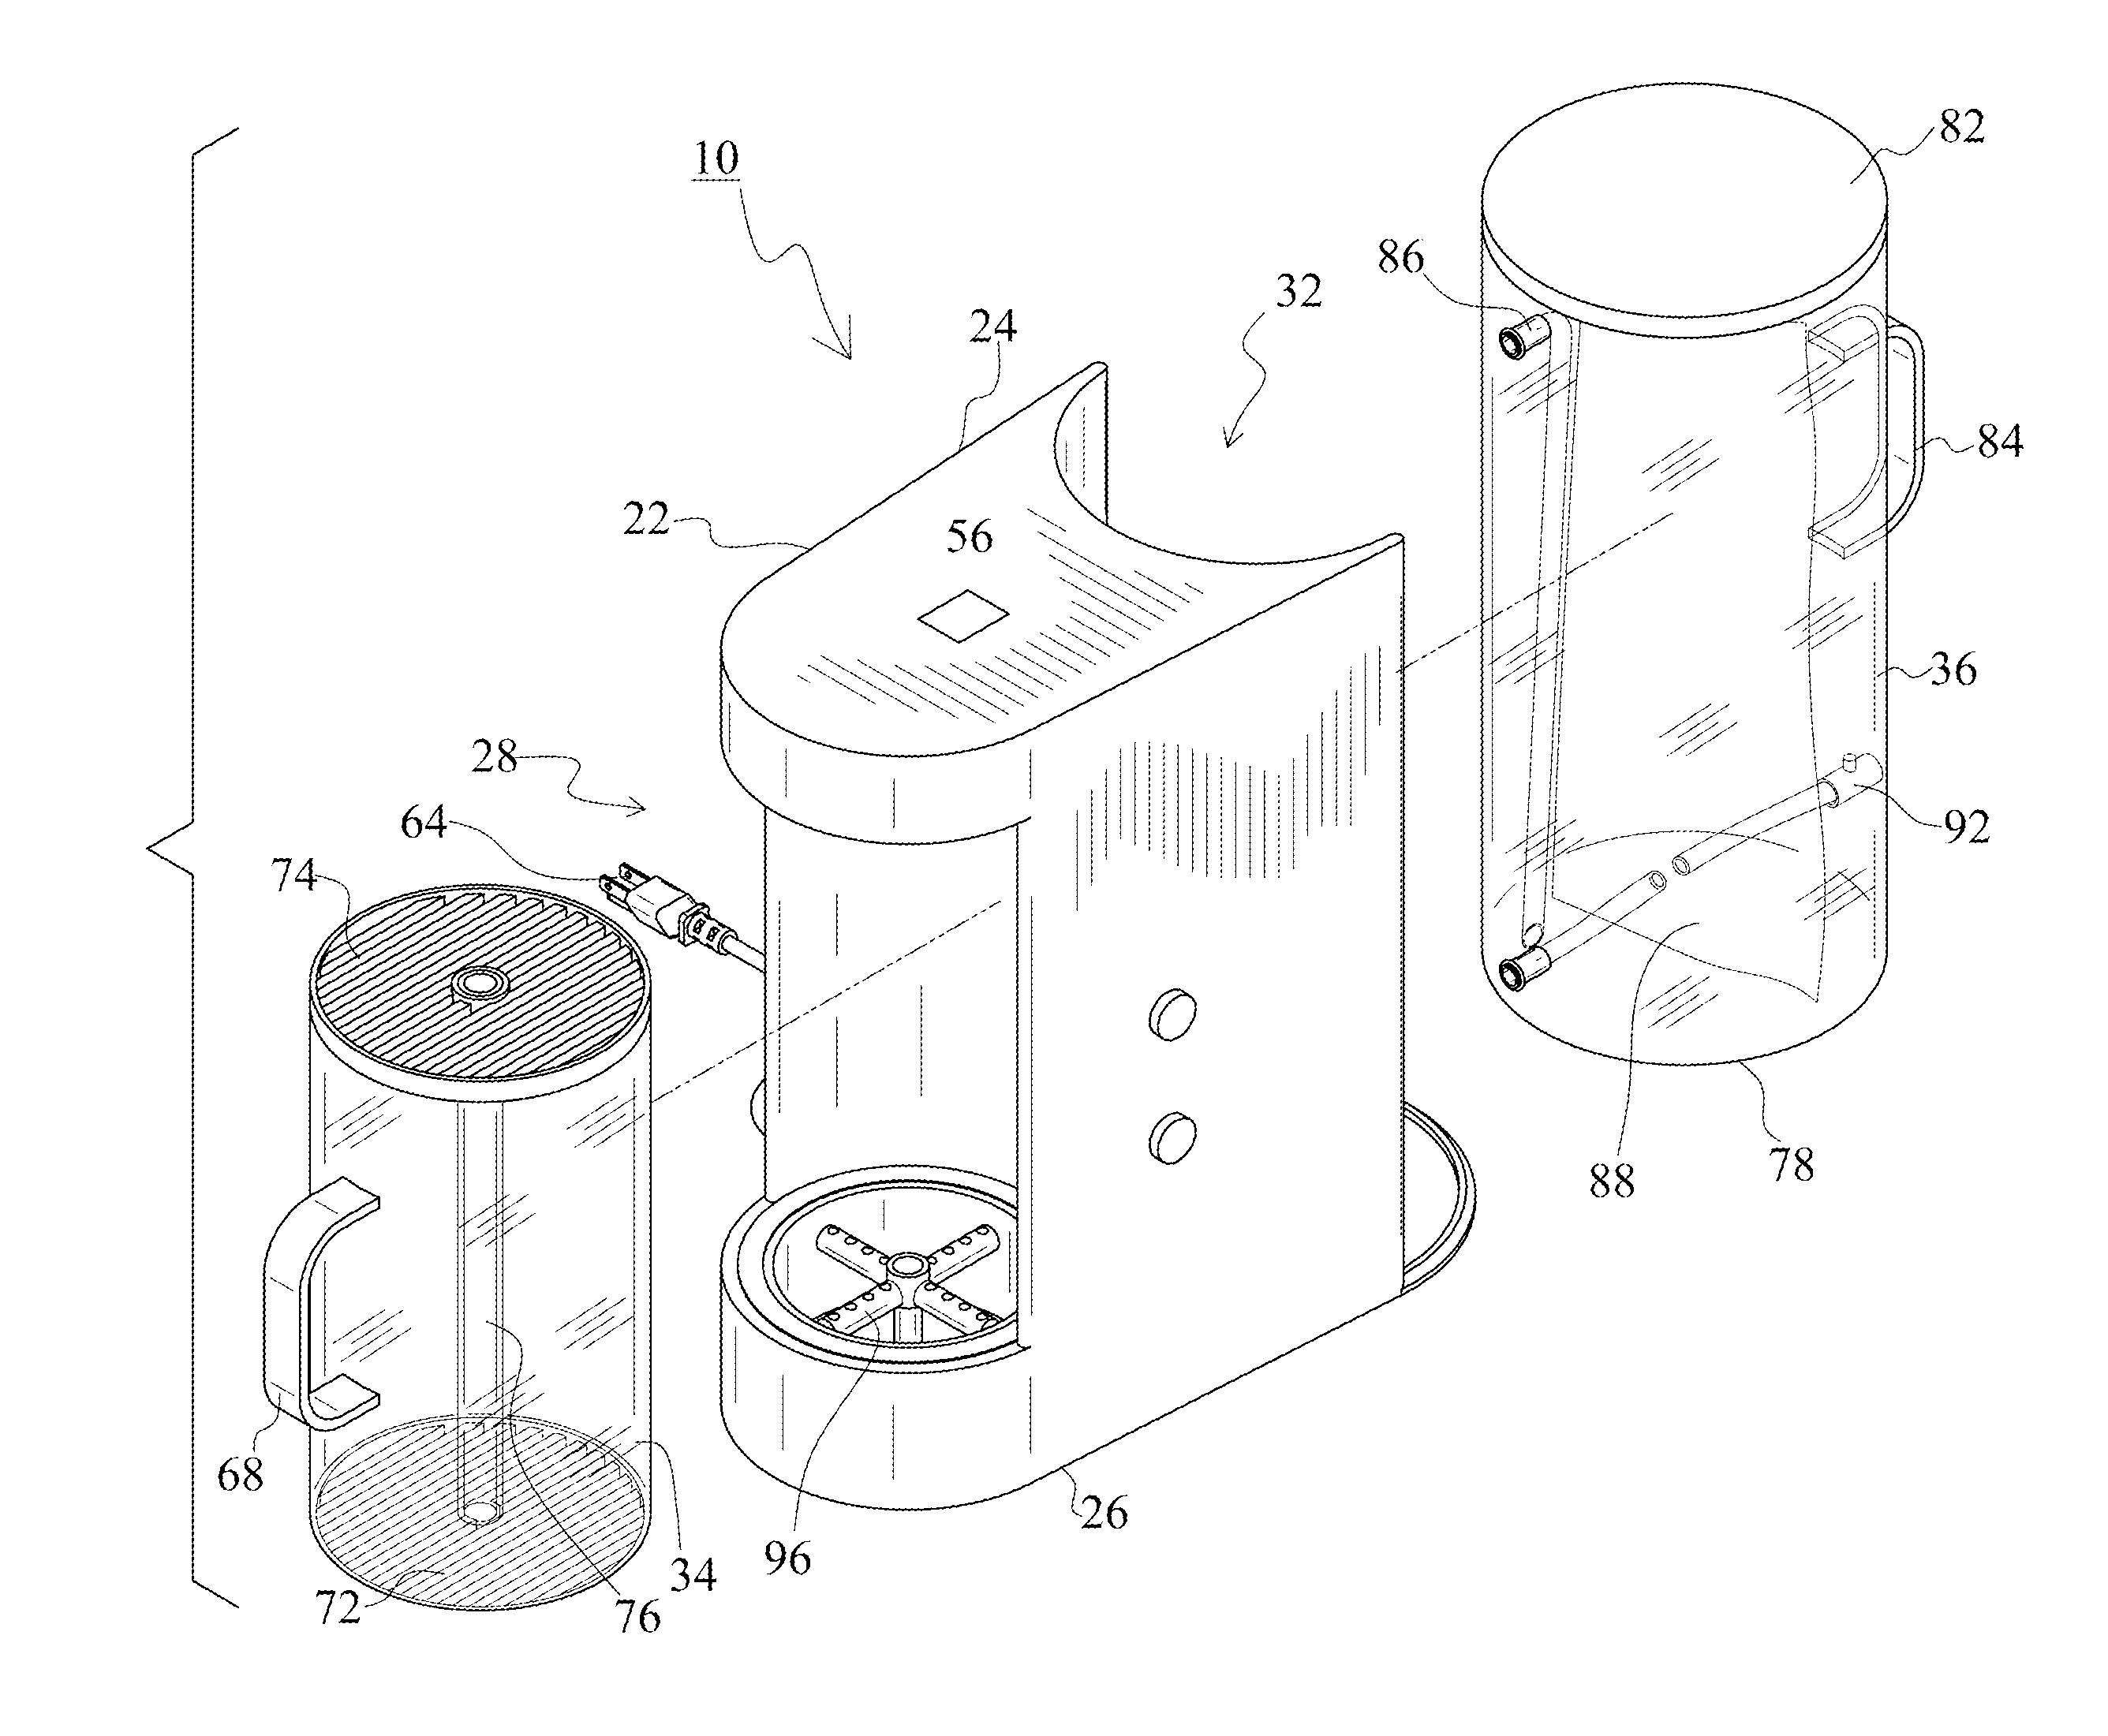 Method for Washing and Sanitizing Articles for an Infant